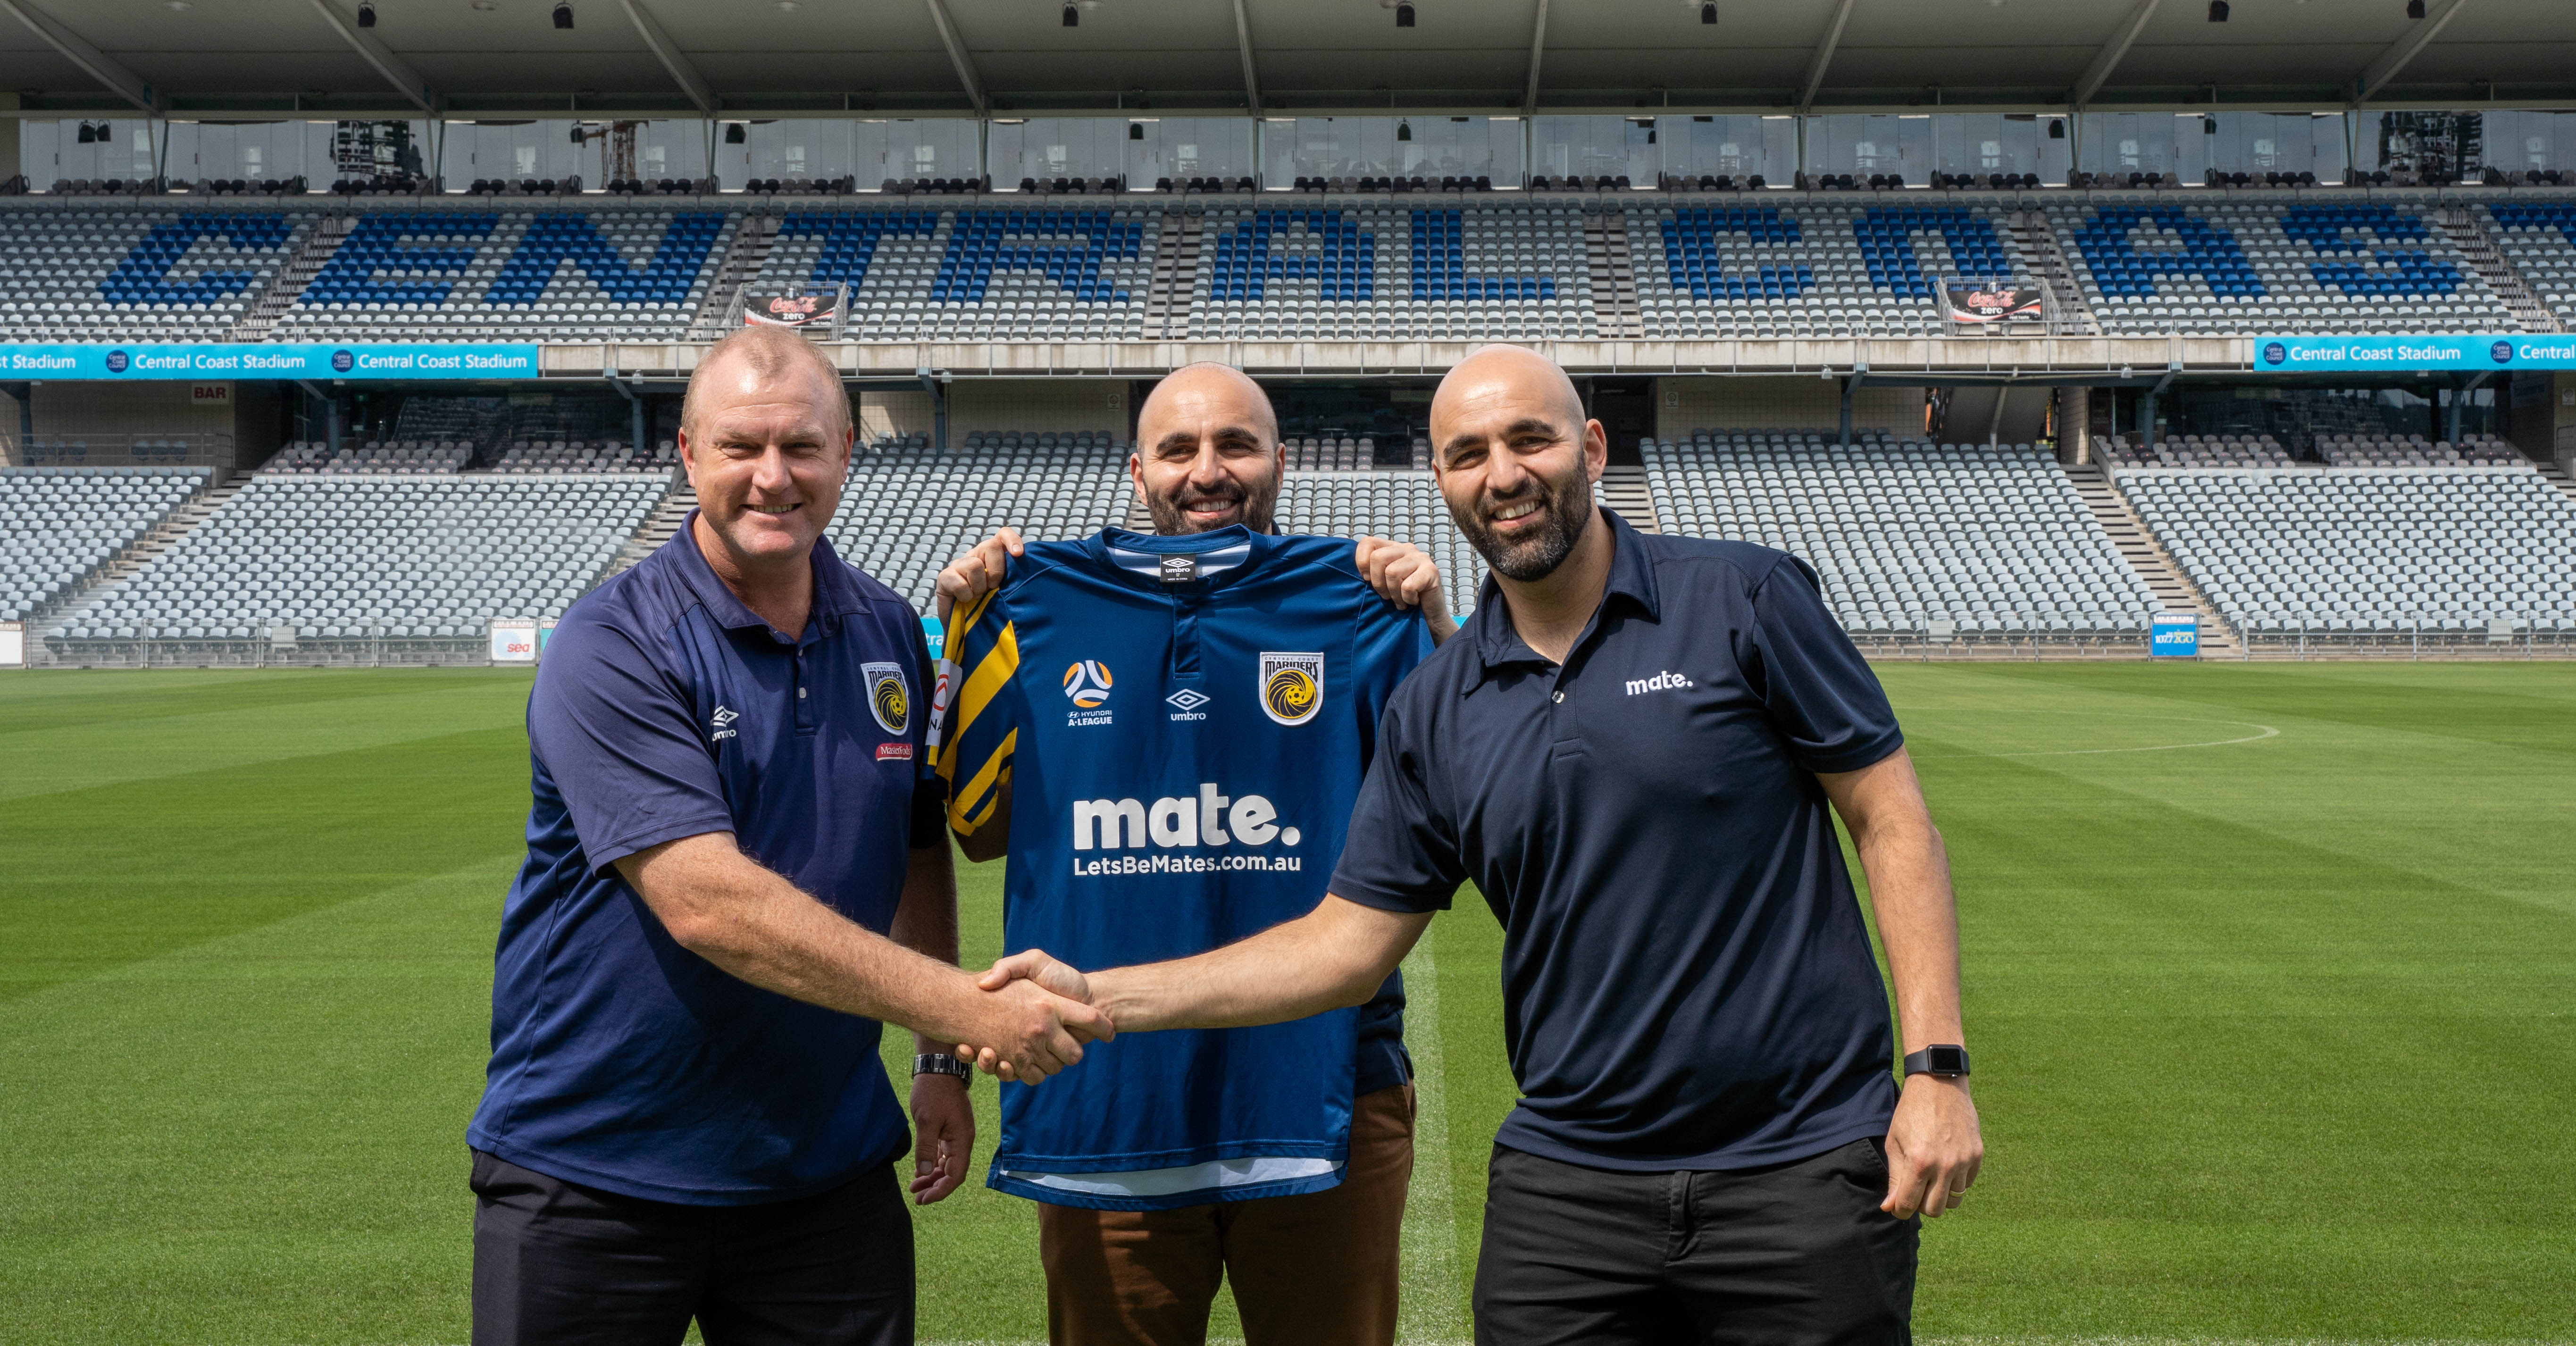 Central Coast Mariners & MATE launch exciting partnership - Central Coast  Mariners